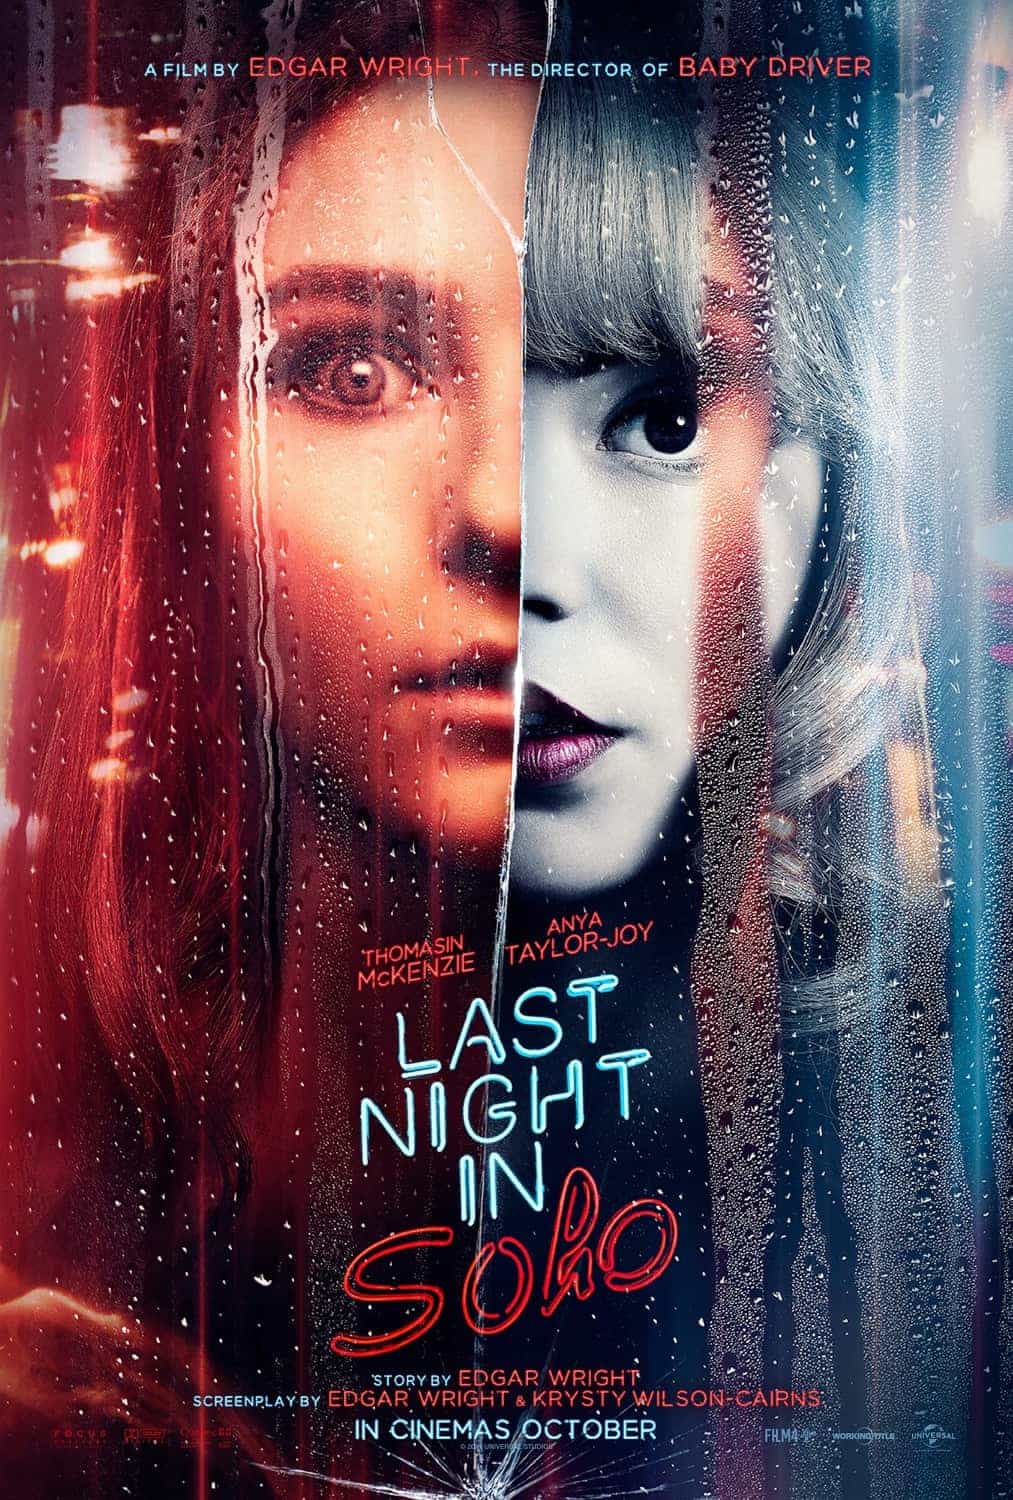 Last Night in Soho is given an 18 age rating in the UK for strong bloody violence